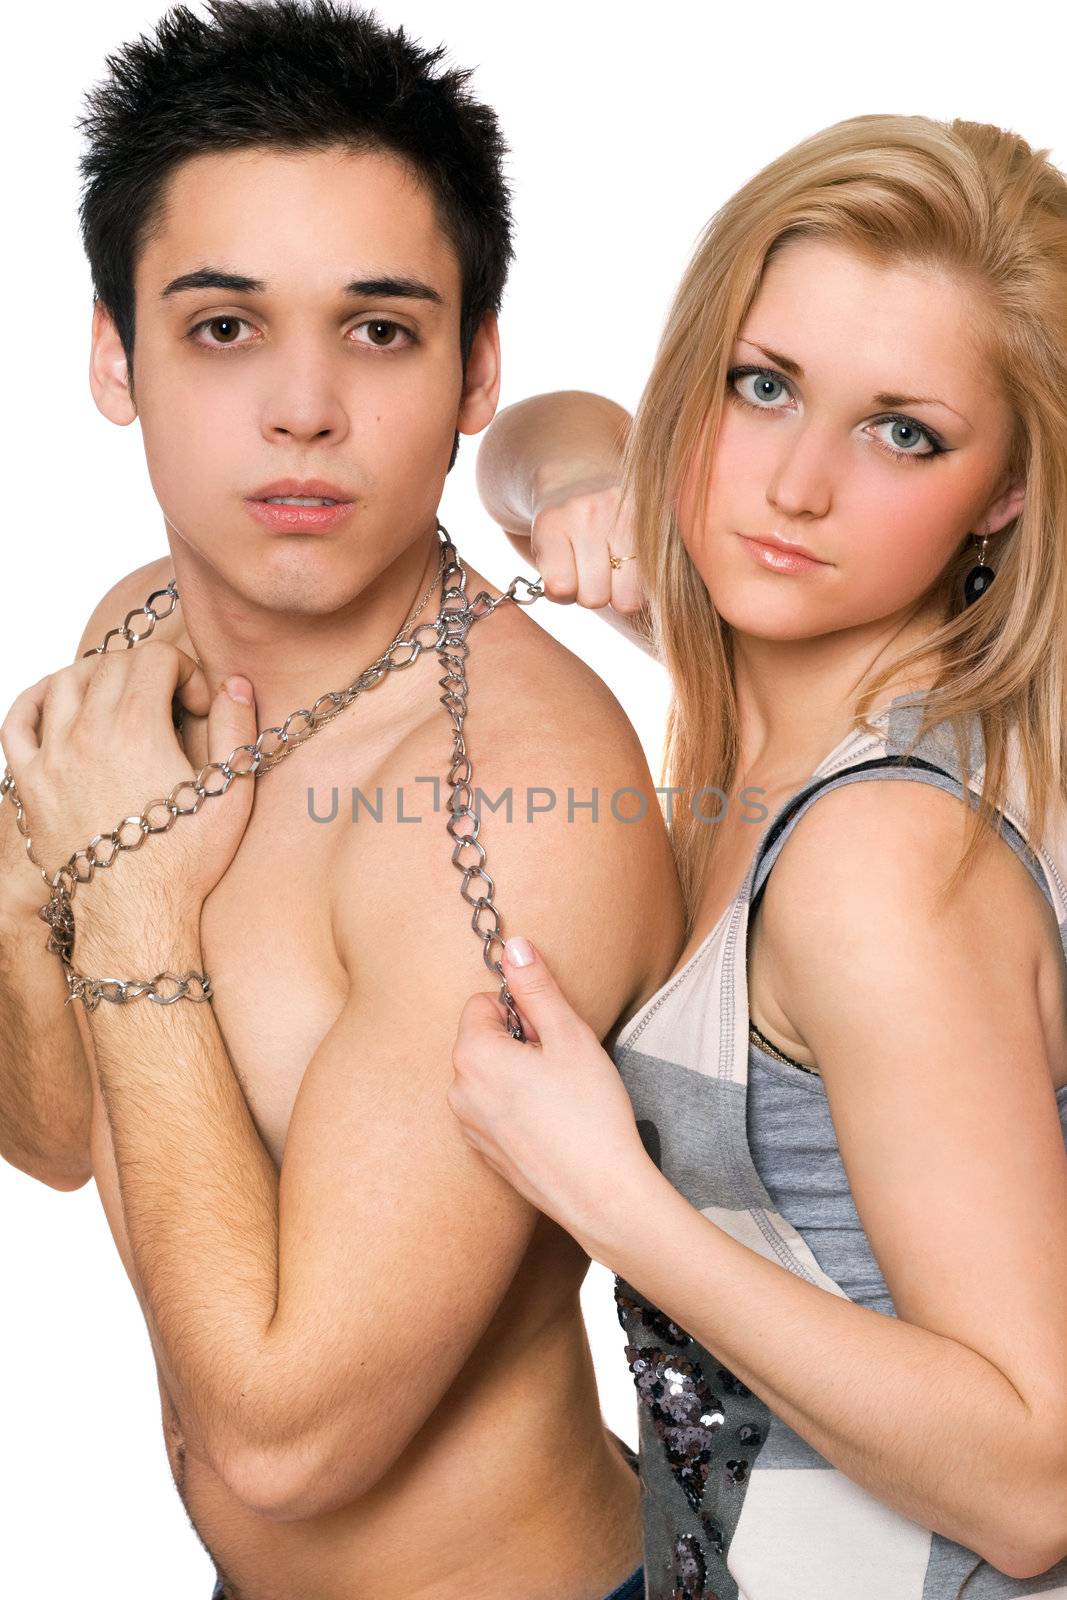 Pretty young woman and a guy in chains